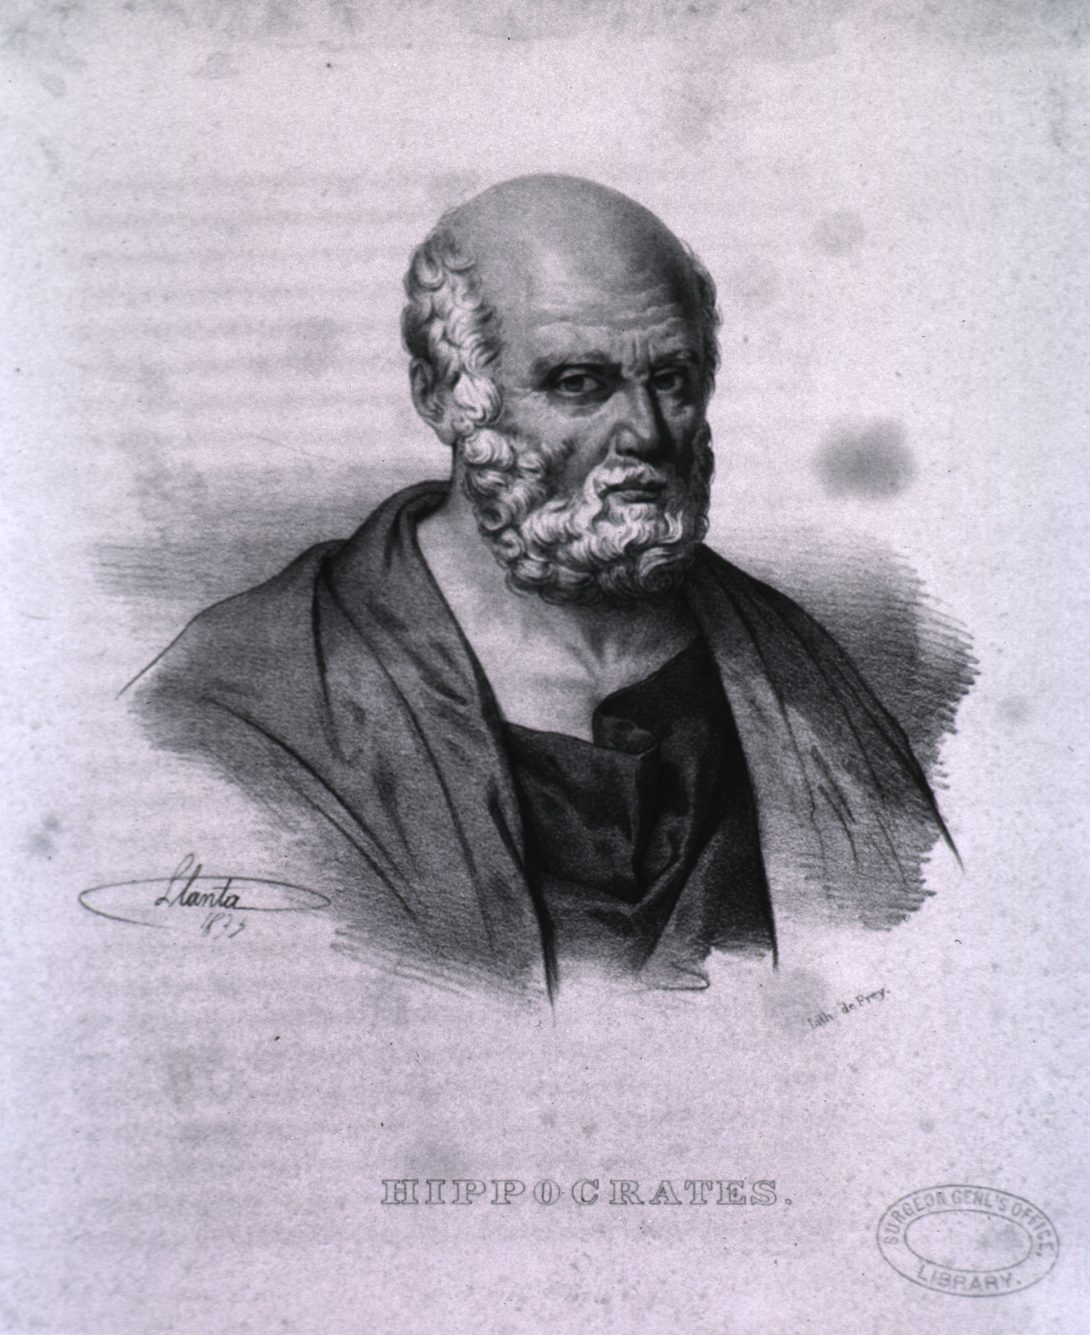 Hippocrates of Kos (5th/4th century BCE), the Father of Medicine